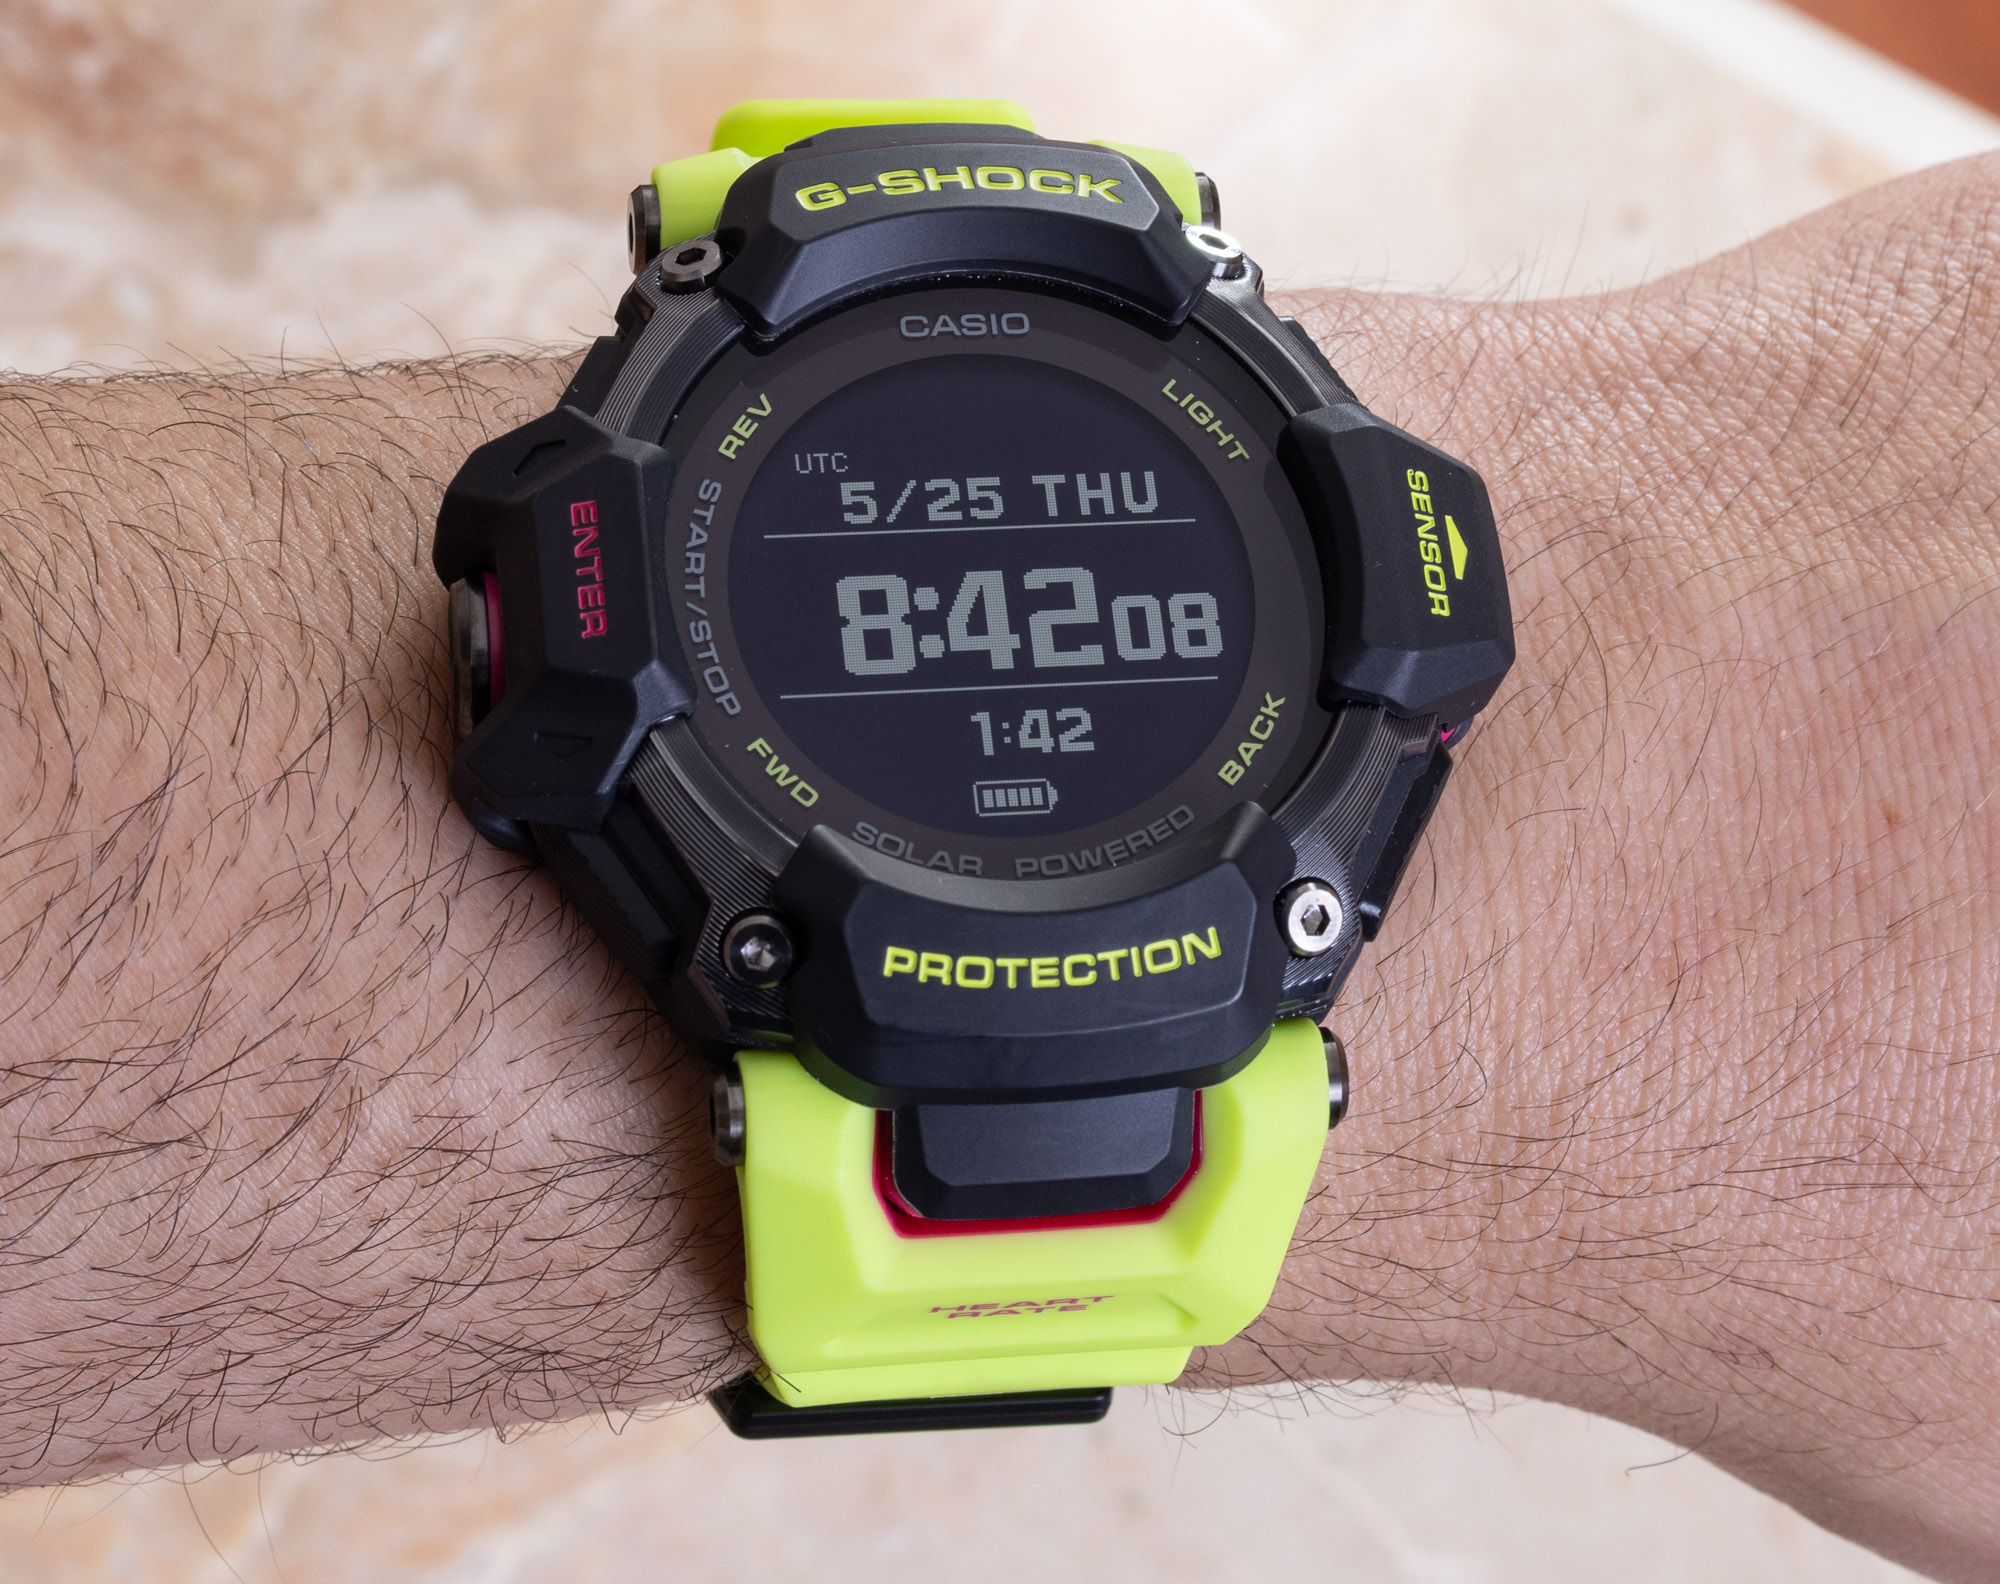 Watch Review: Casio G-Shock GBD-H2000 | Smart Move aBlogtoWatch Tracker Activity